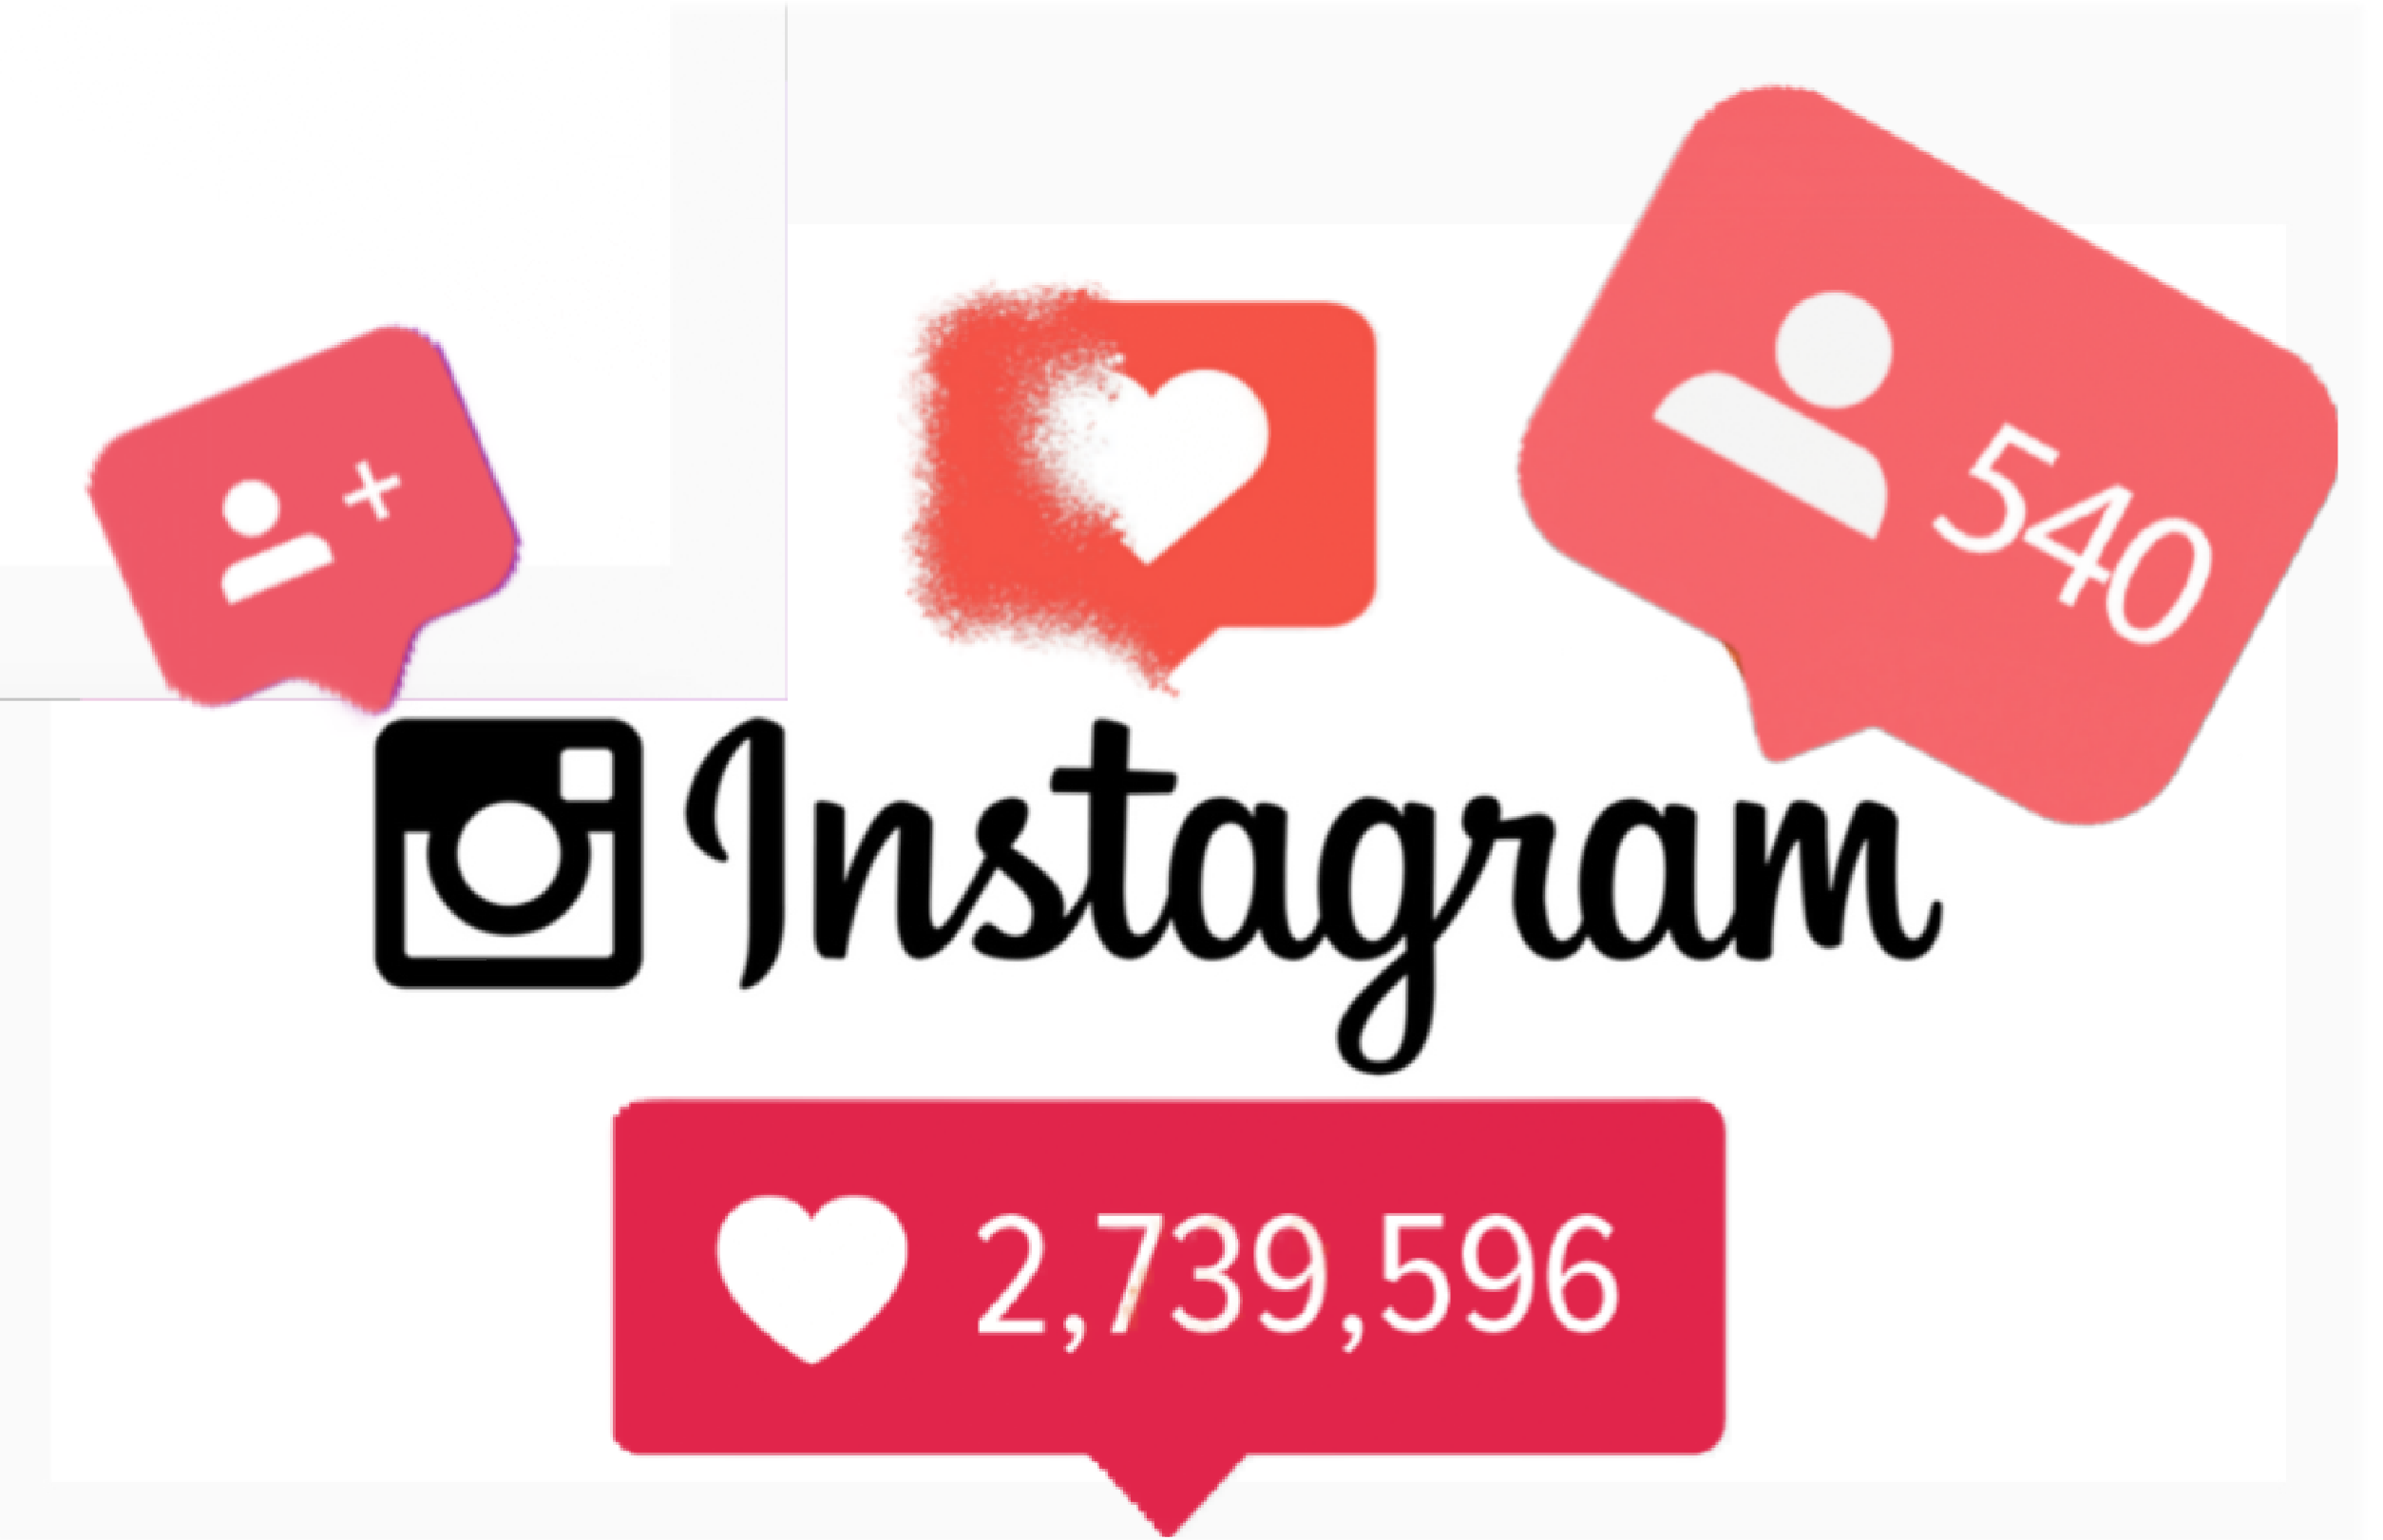 Buy Instagram Likes UK at Affordable Prices post thumbnail image